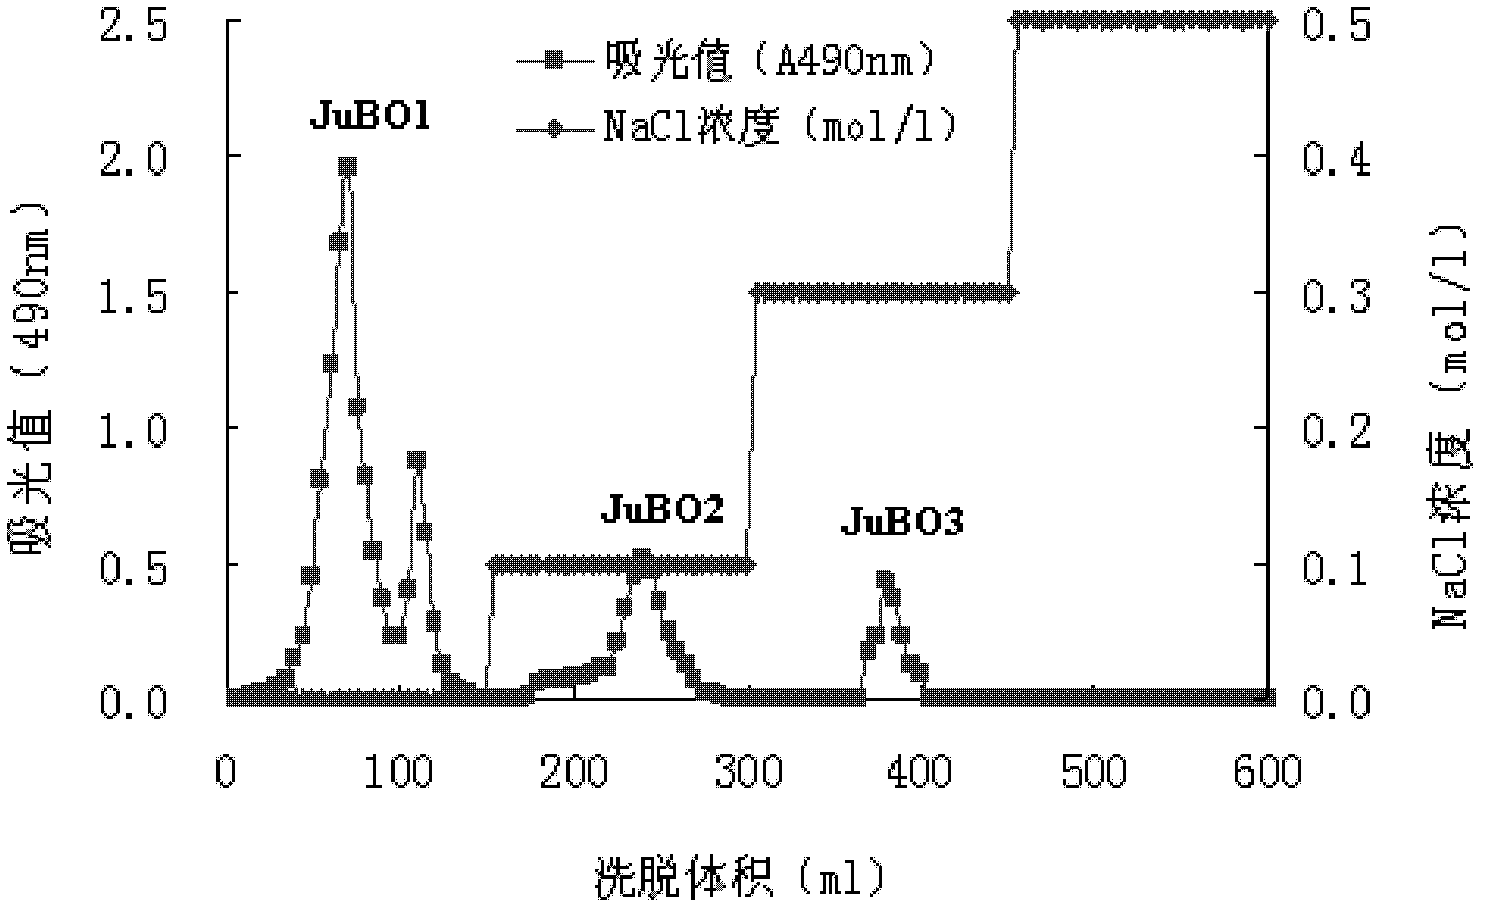 Method for preparing multiple oligosaccharides by separating and purifying Chinese dates